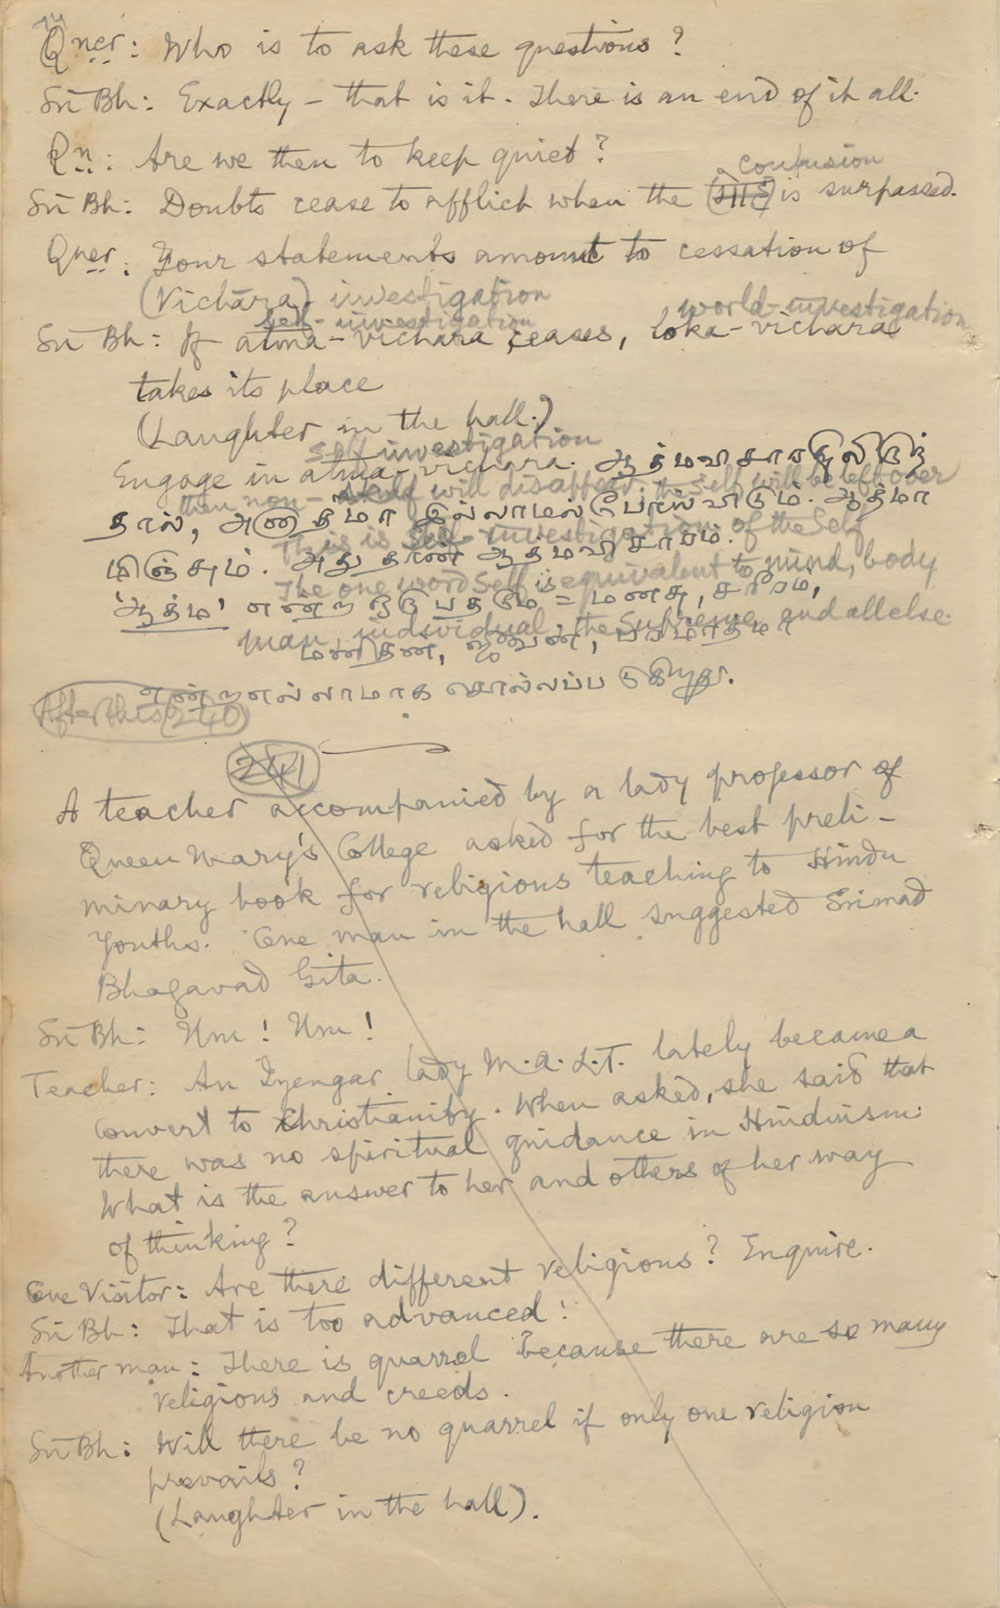 A page from the original manuscript of Talks. Part of it was recorded in Tamil, one story has been deleted, and there are several corrections on the page.